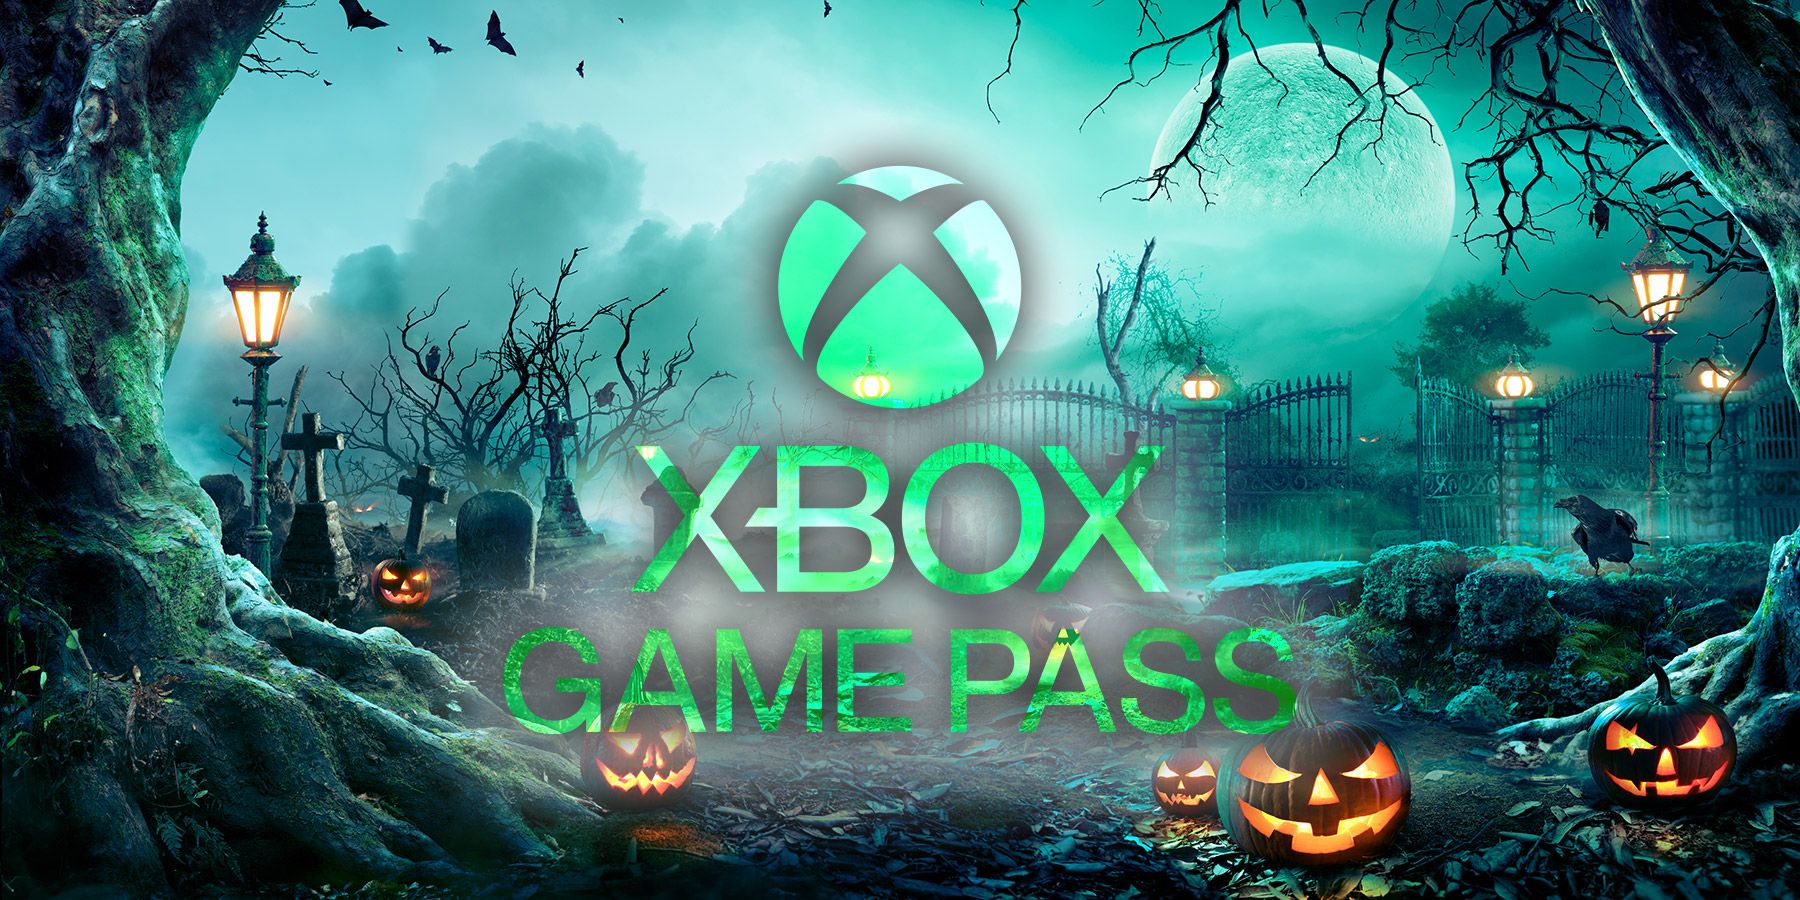 Is World of Horror on Xbox & PC Game Pass? - GameRevolution